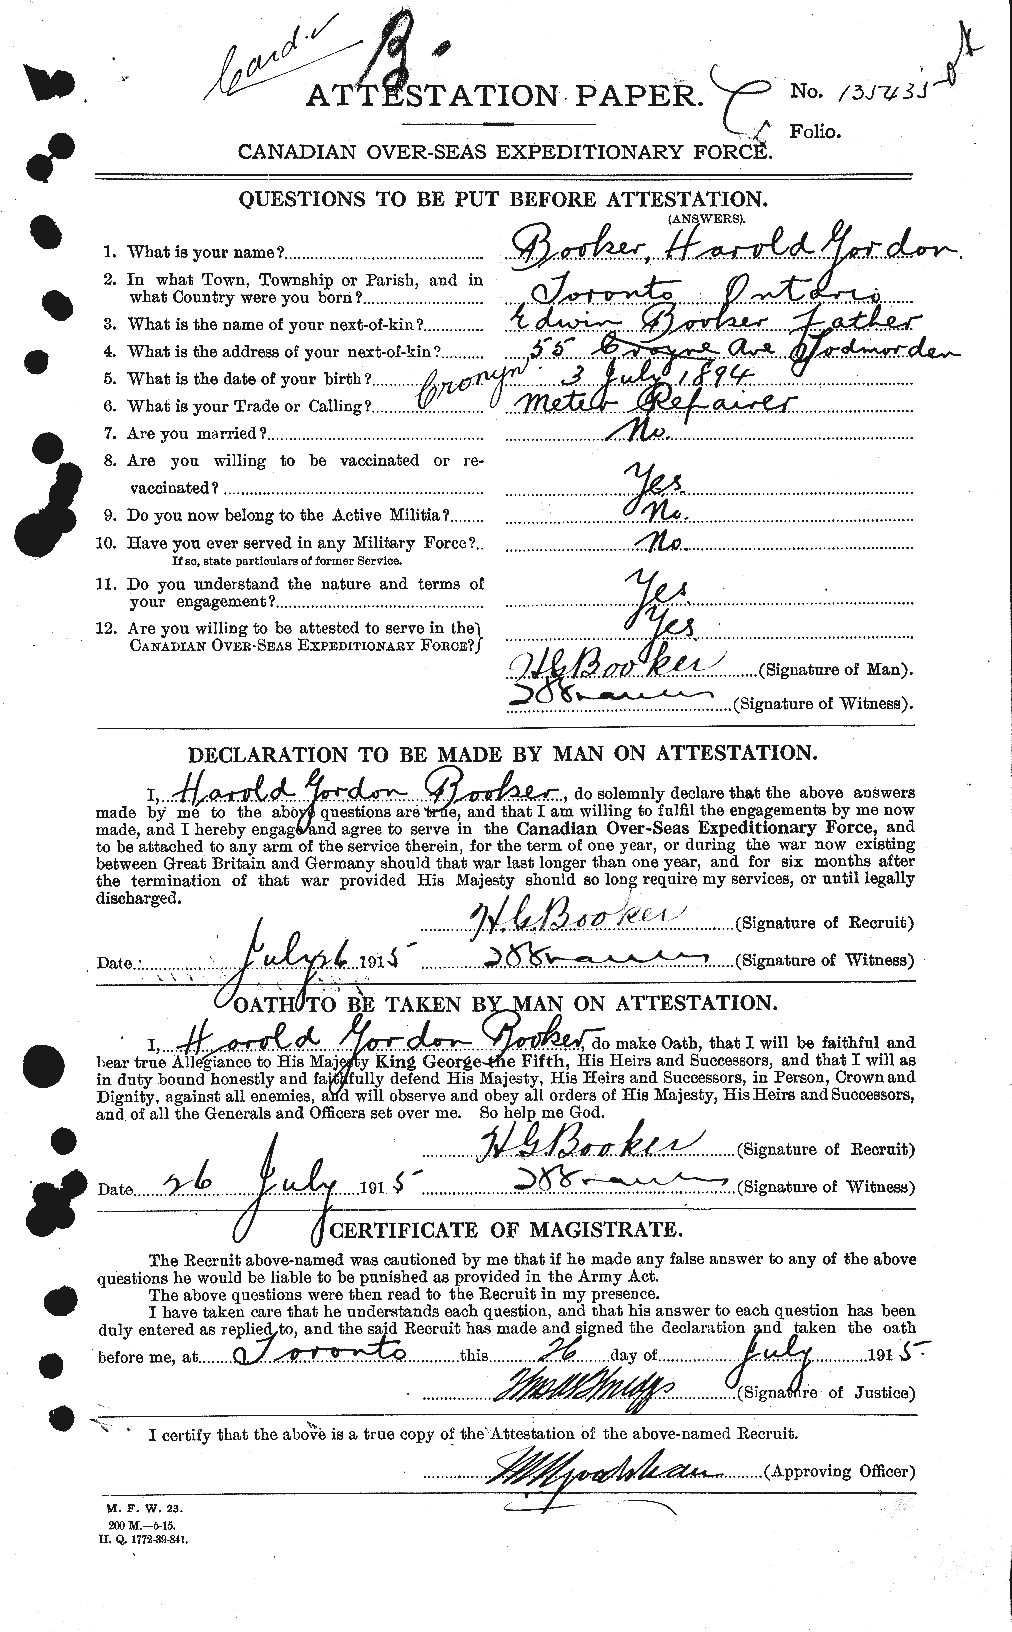 Personnel Records of the First World War - CEF 251248a